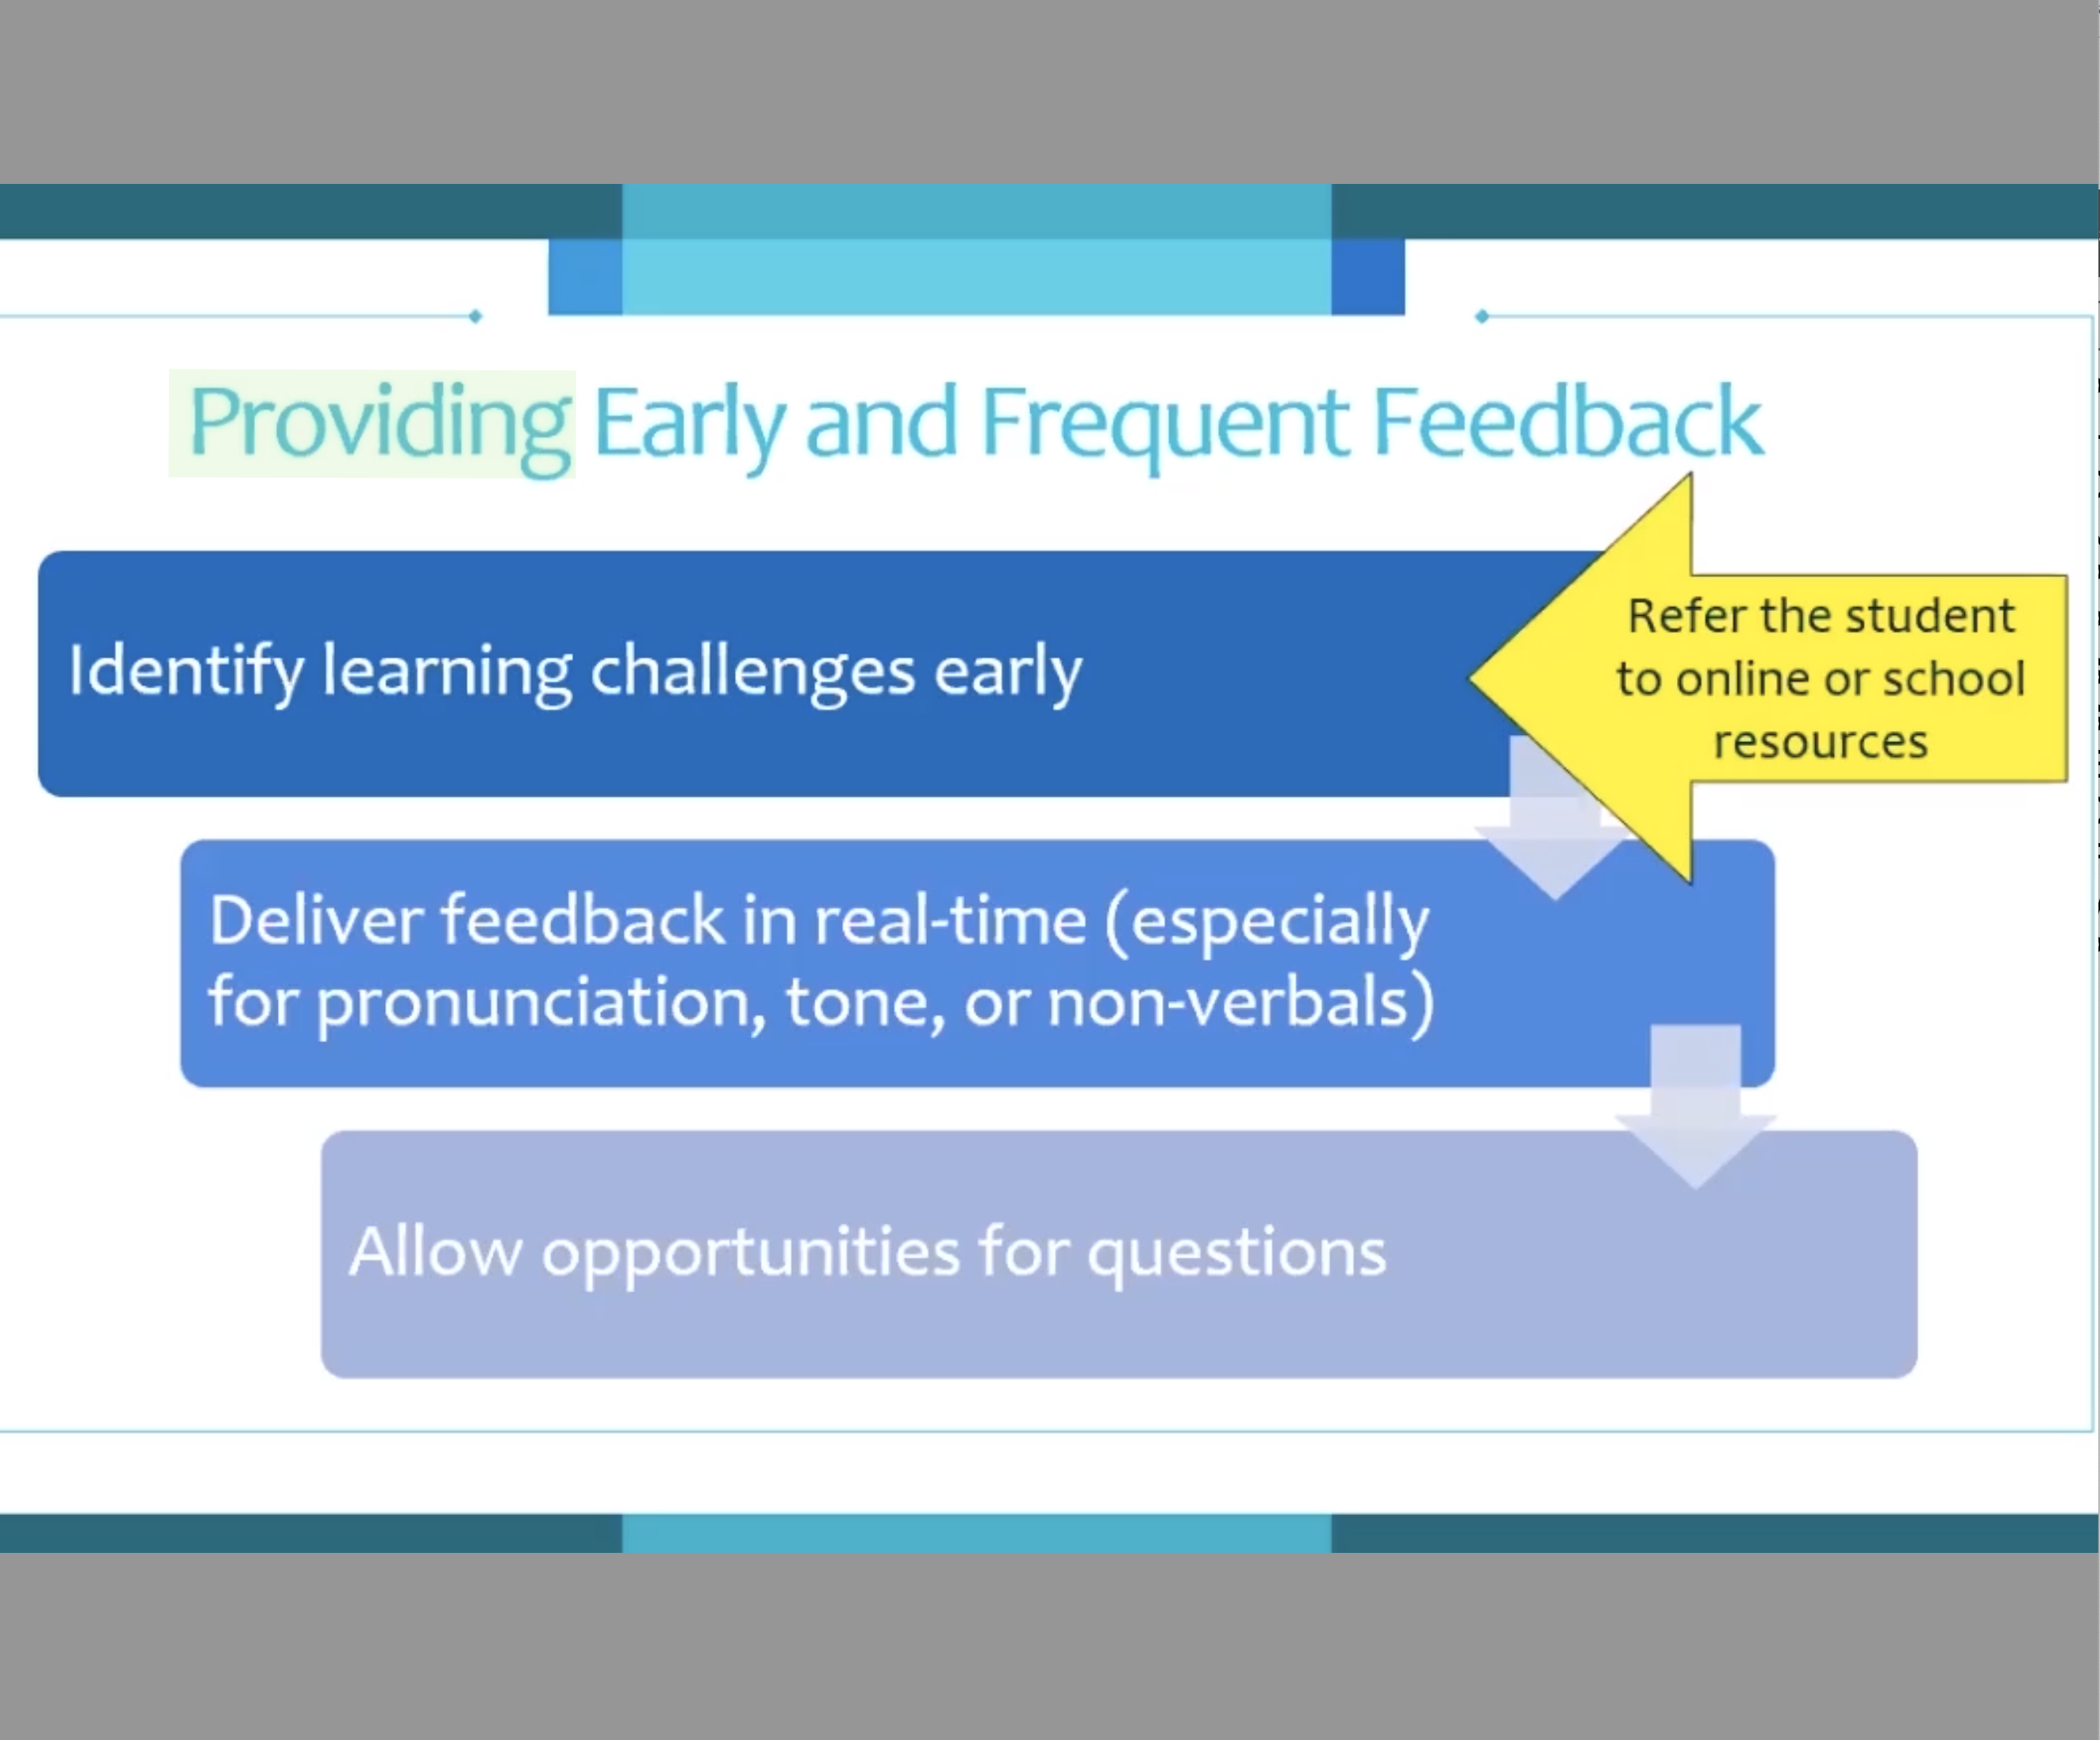 Providing Early and Frequent Feedback: identify learning challenges early, deliver feedback in real-time, allow opportunities for questions